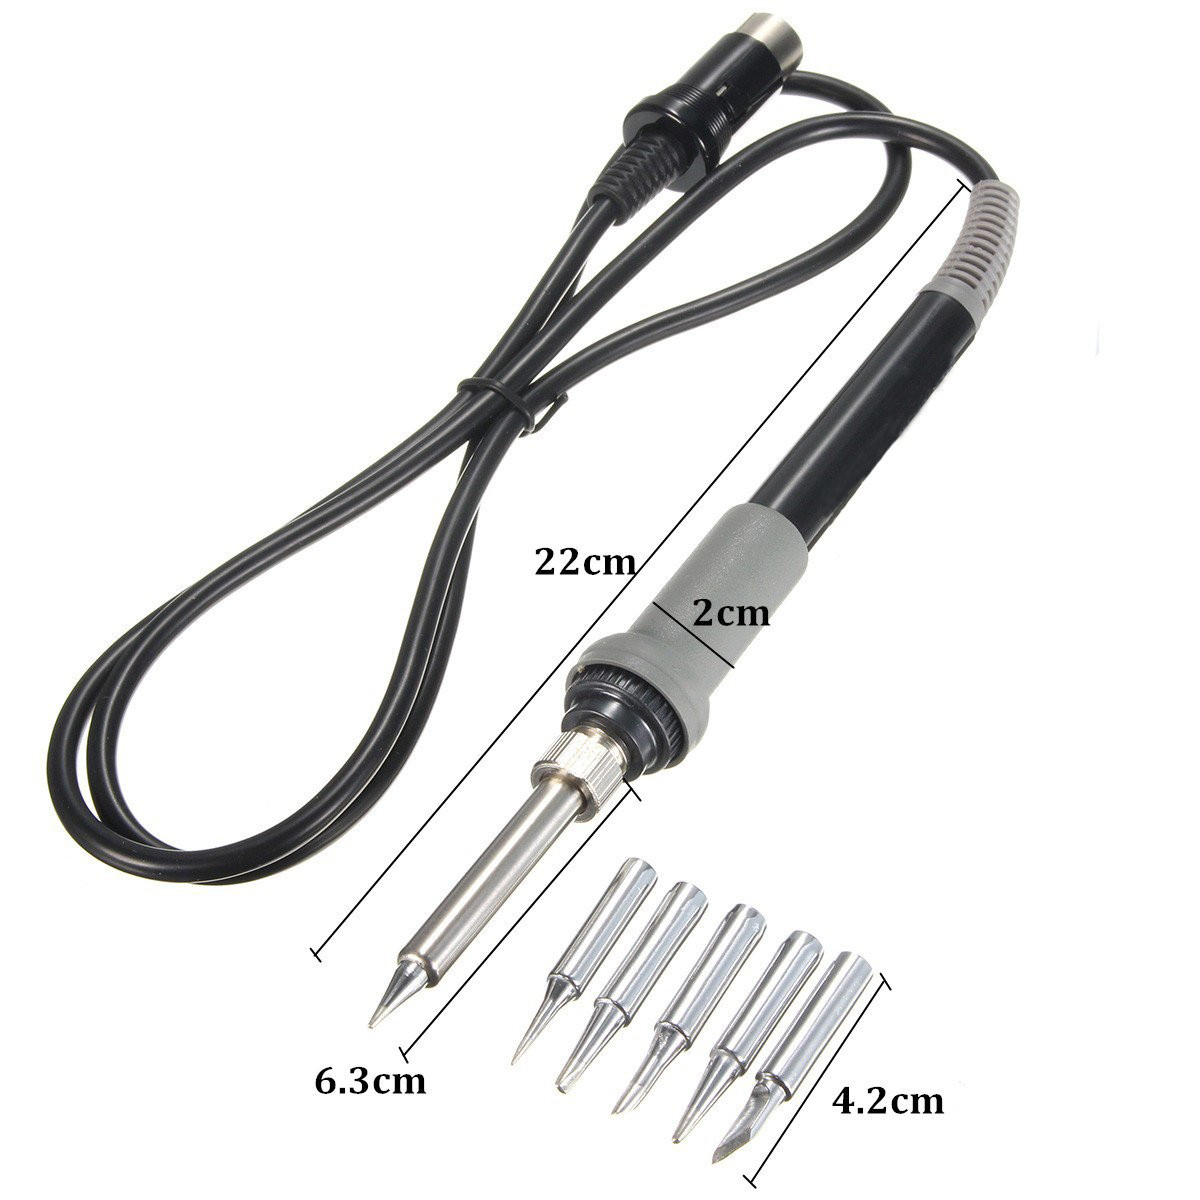 

FX-8801 65W Compatible Soldering Iron Handle with 5 Tips for HAKKO FX-888 FX-888D